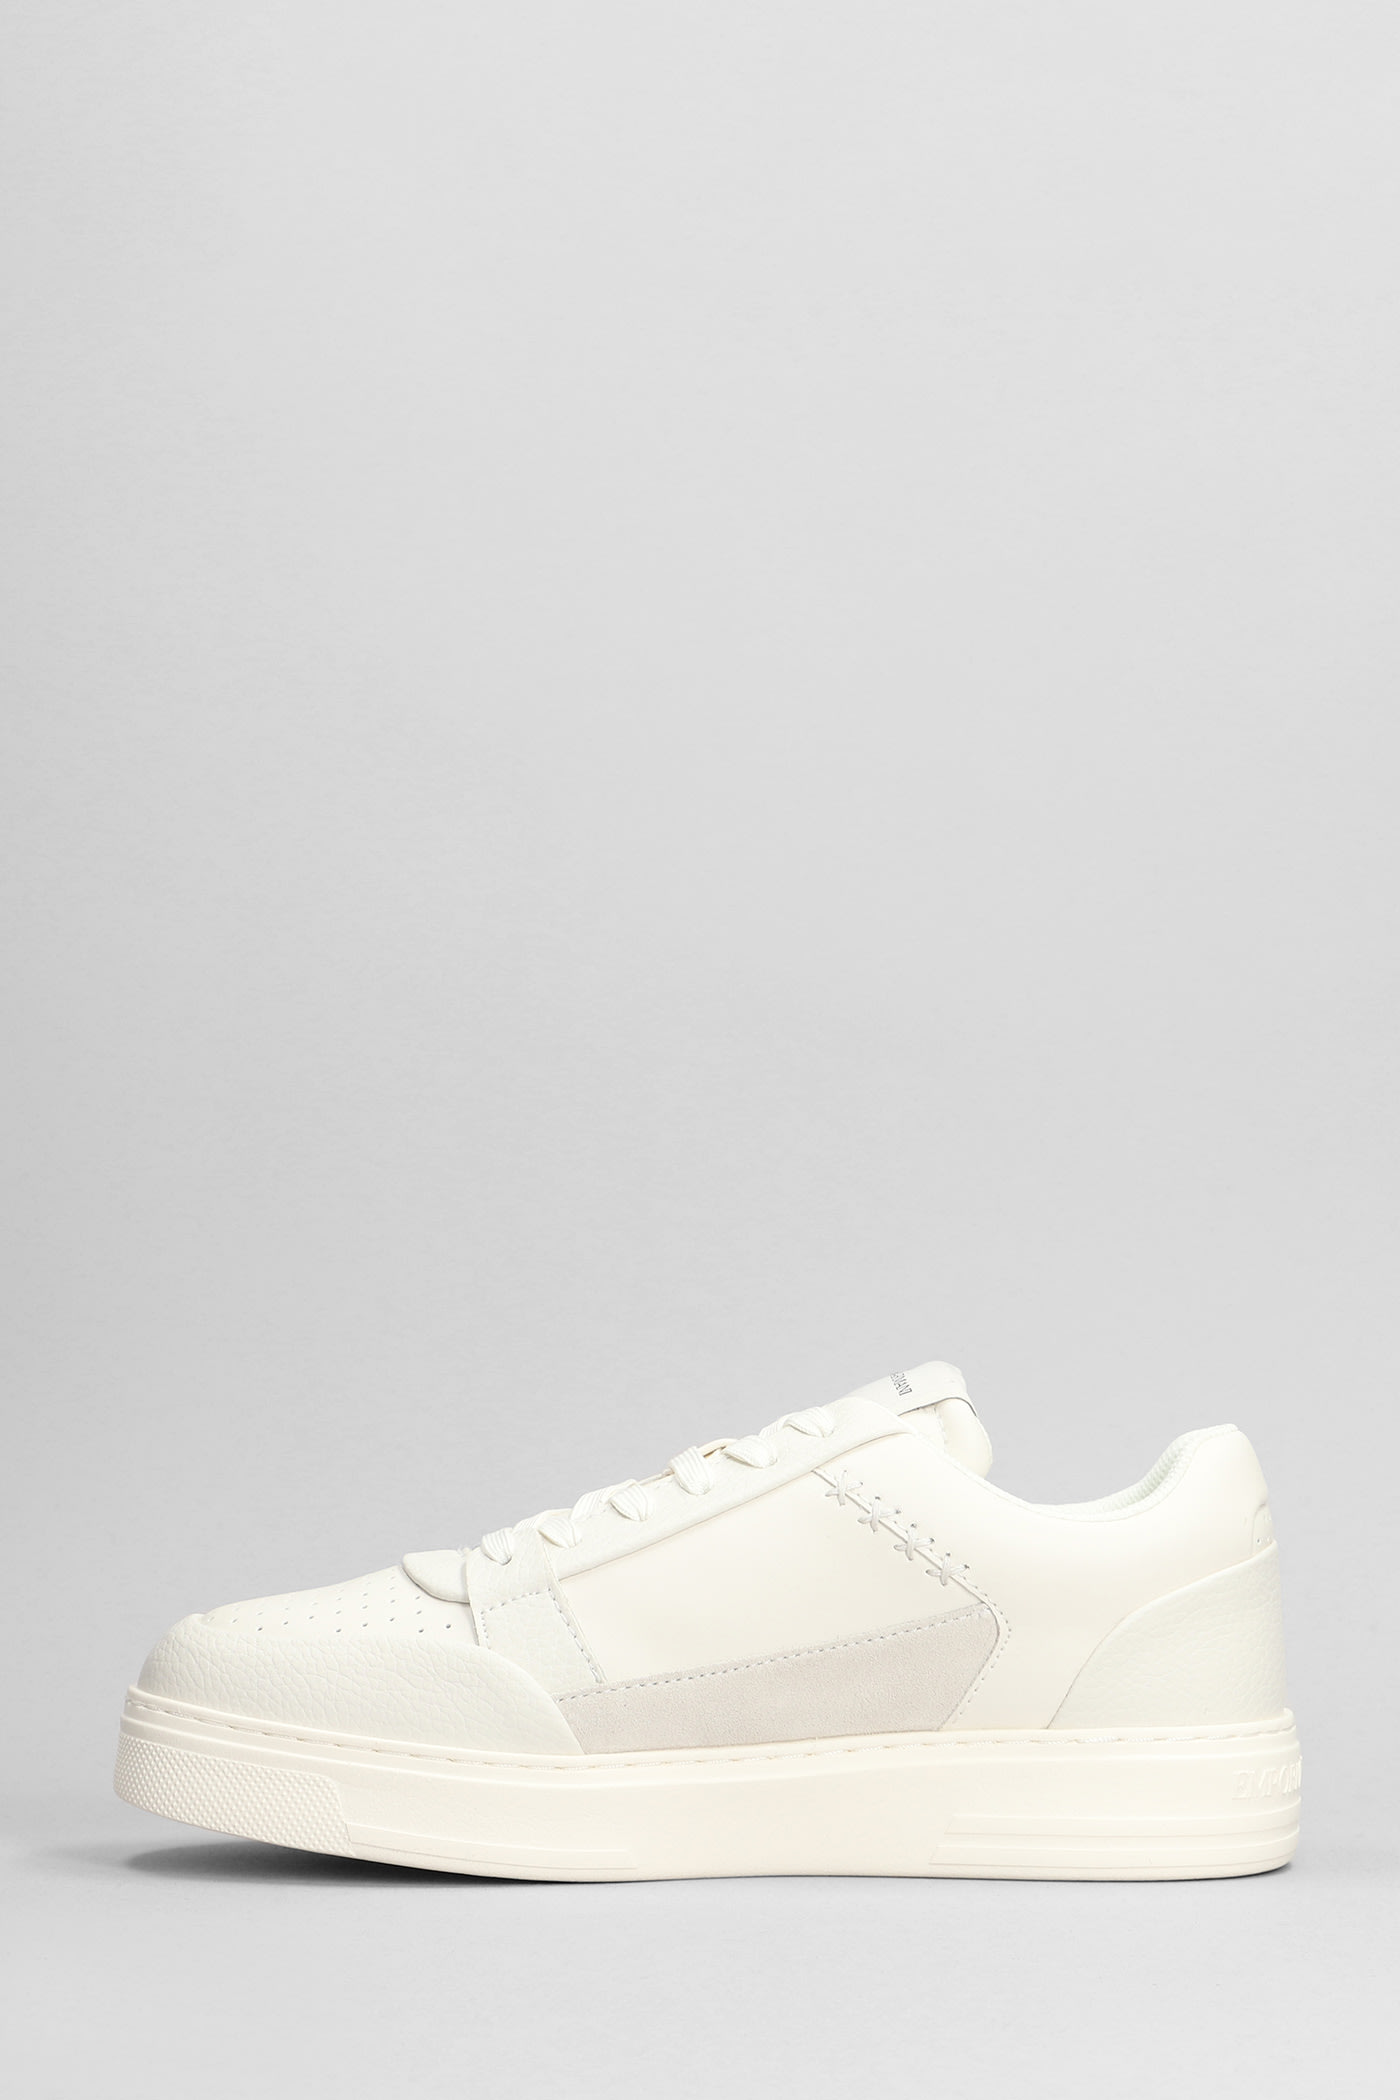 Shop Emporio Armani Sneakers In Beige Suede And Leather